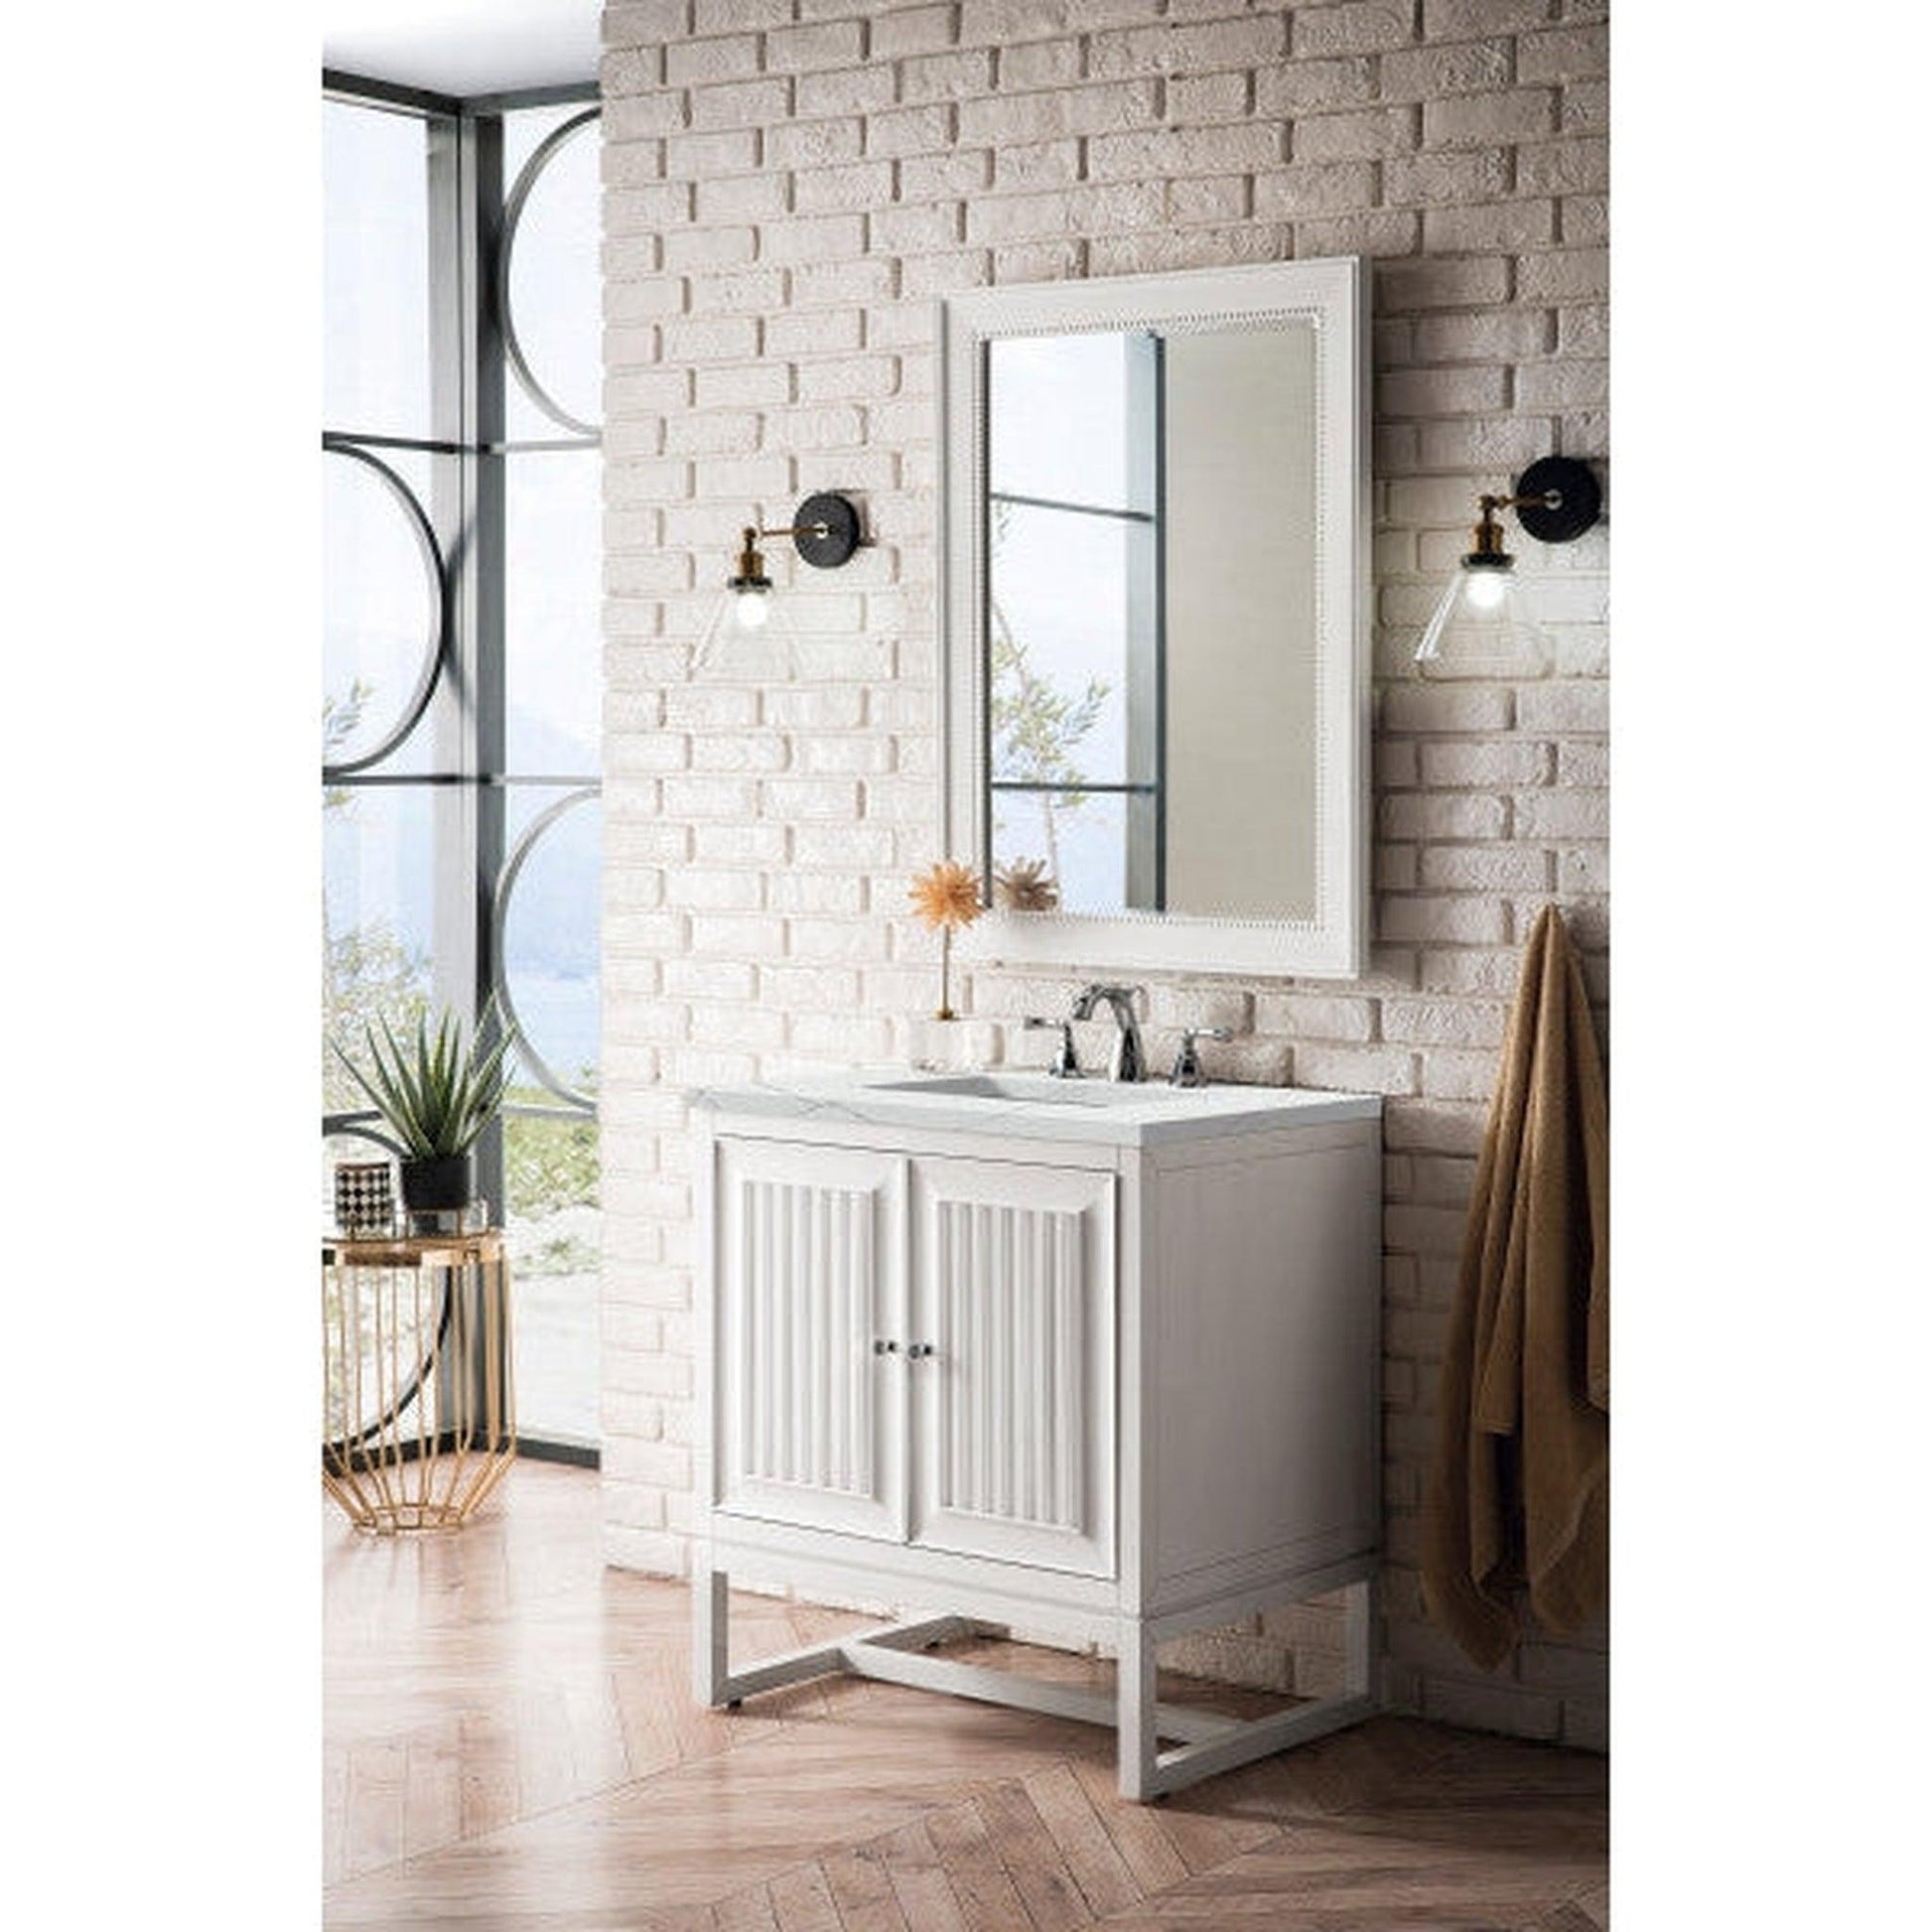 James Martin Athens 30" Single Glossy White Bathroom Vanity With 1" Ethereal Noctis Quartz Top and Rectangular Ceramic Sink